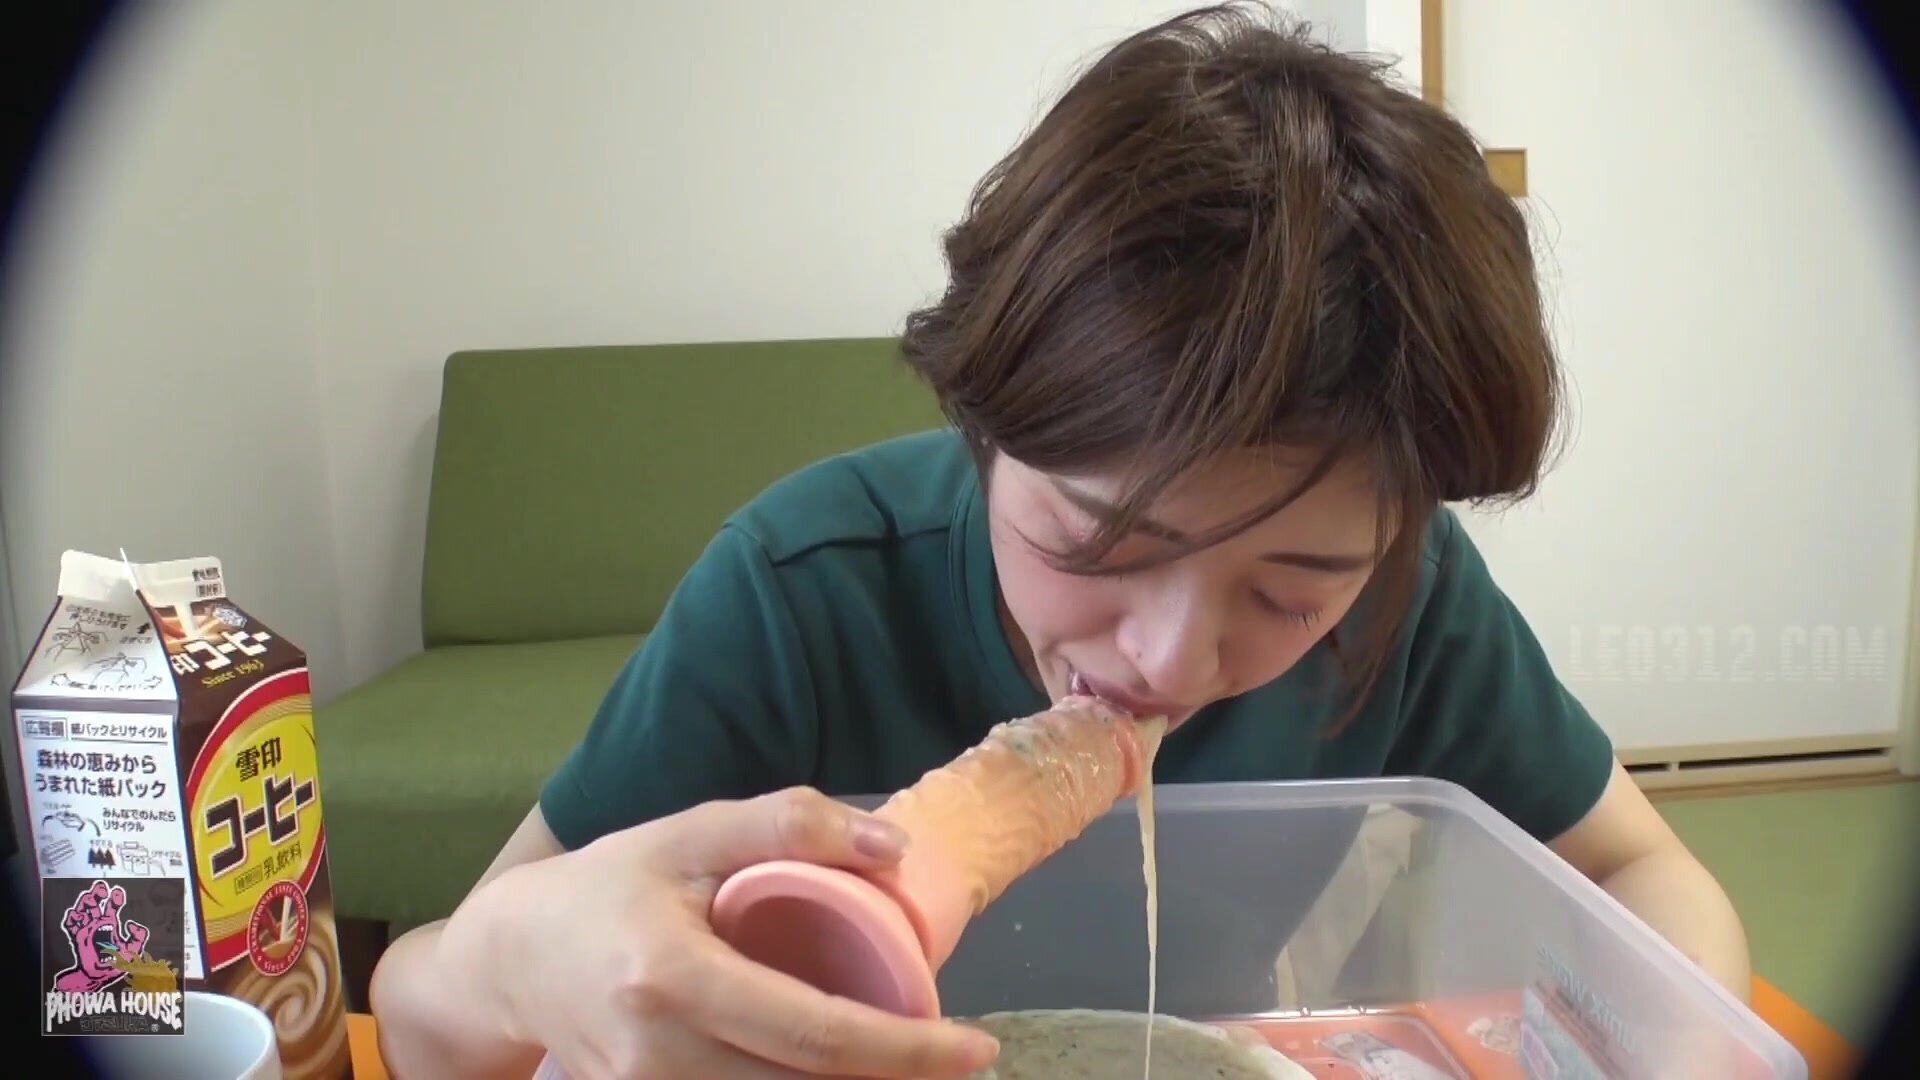 Sick japanese girl puking on a dildo